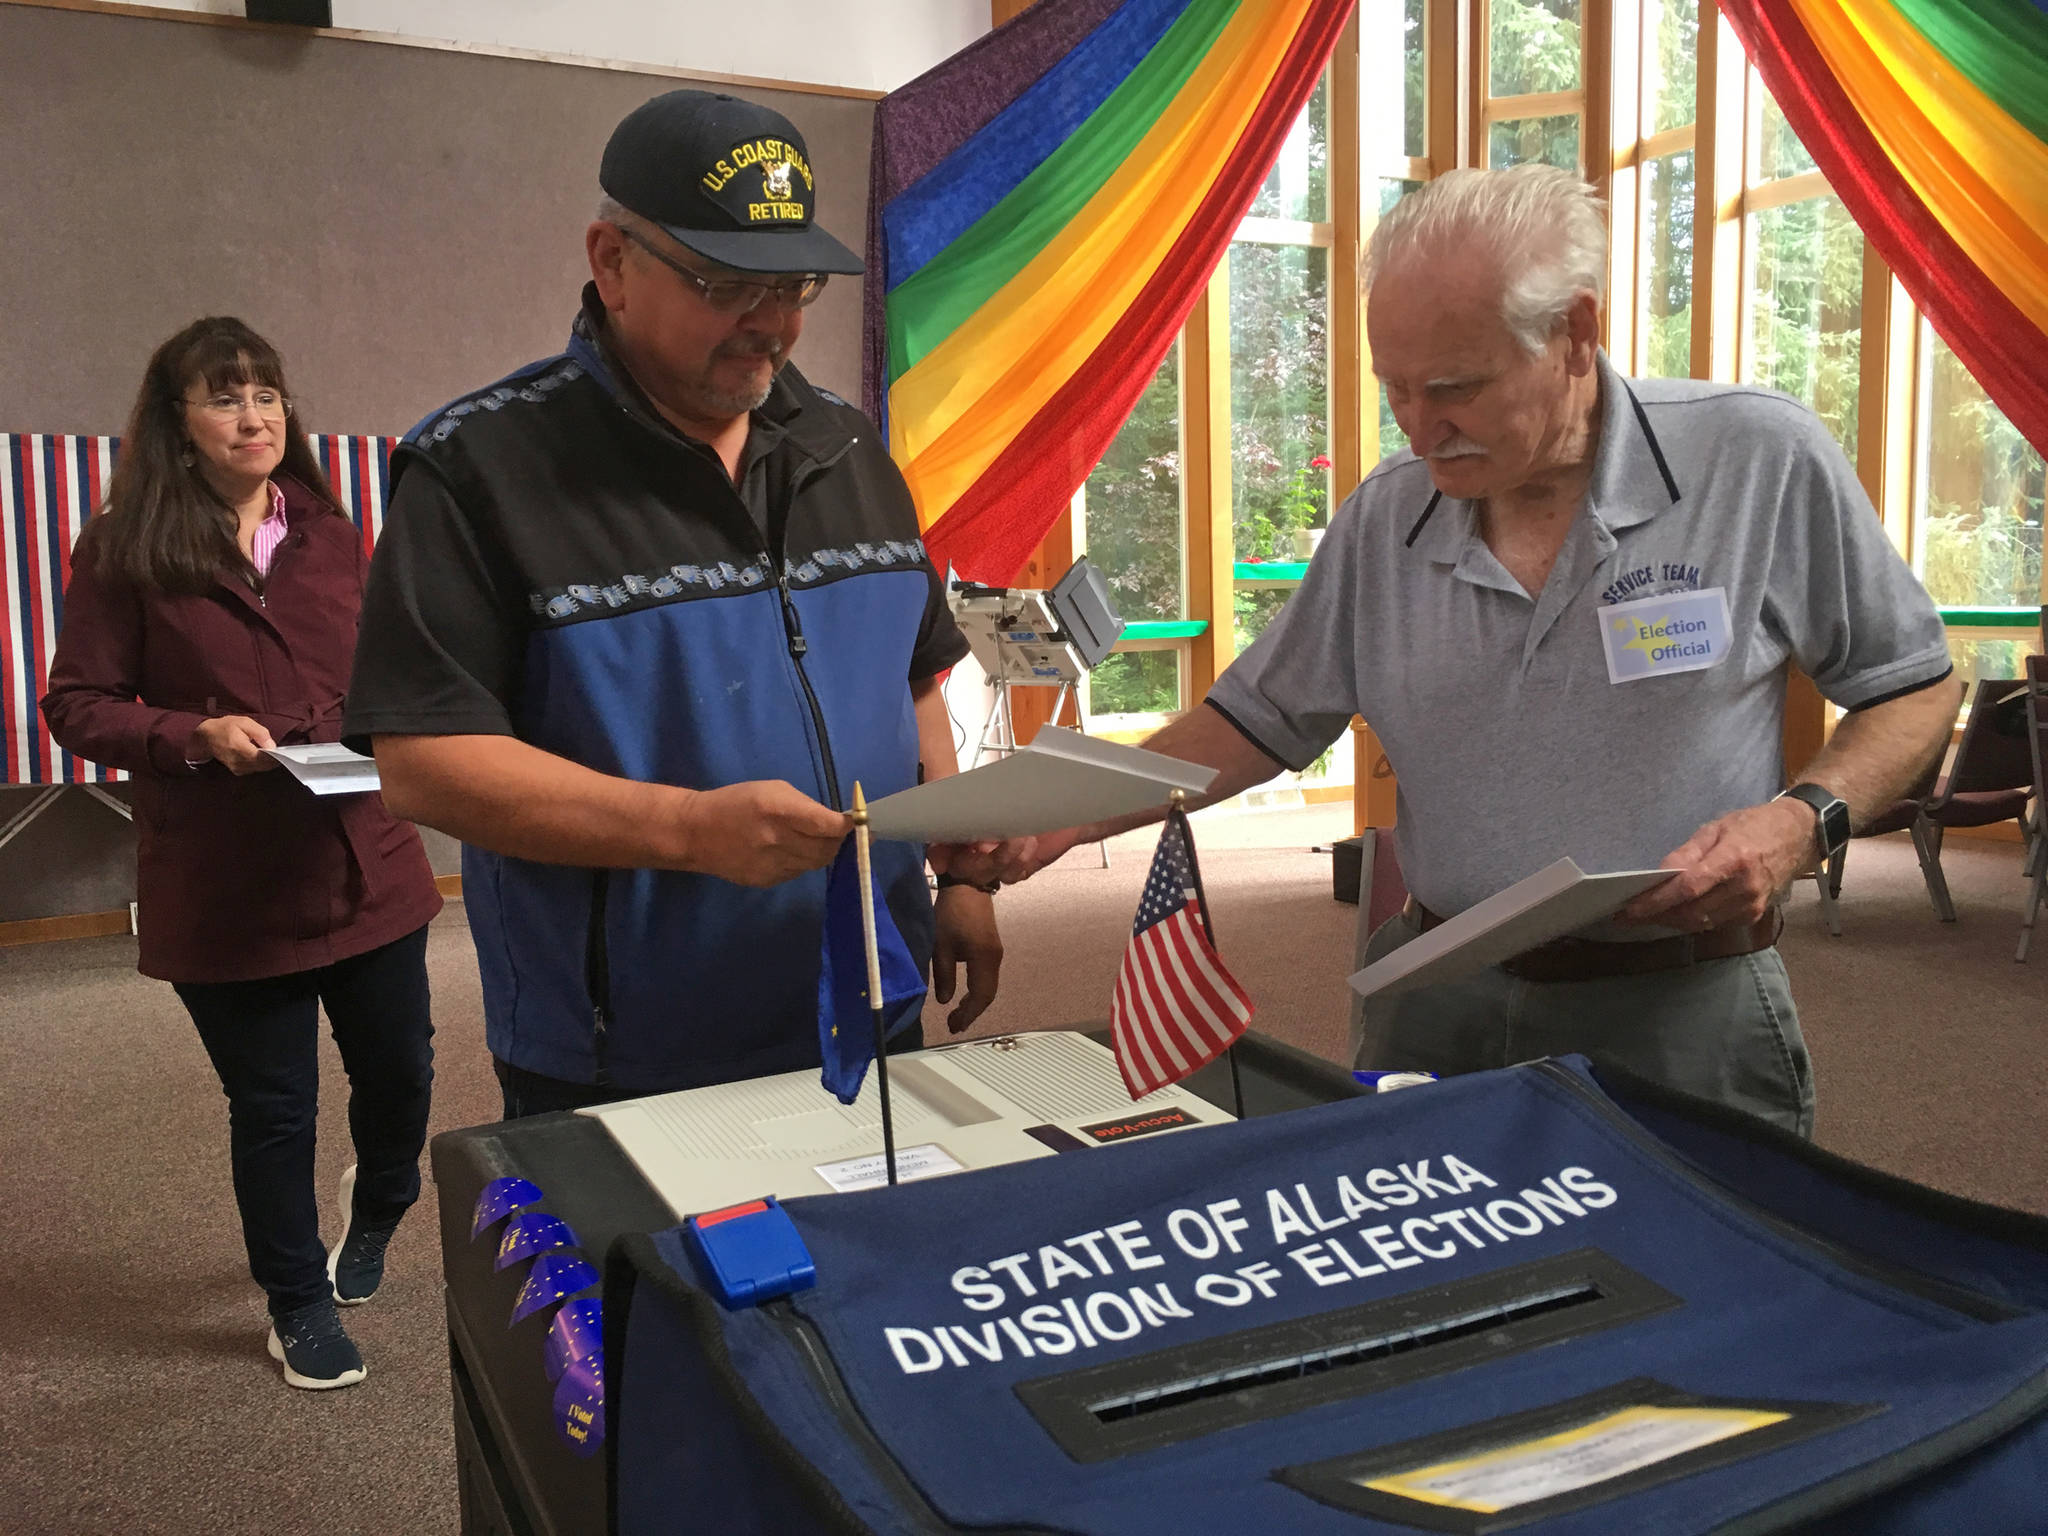 Rob Edwardson, Democratic candidate for House District 34, casts his ballot Tuesday, Aug. 21, 2018 at Aldersgate United Methodist Church. At background is Edwardson’s wife, Sandy. (James Brooks | Juneau Empire)